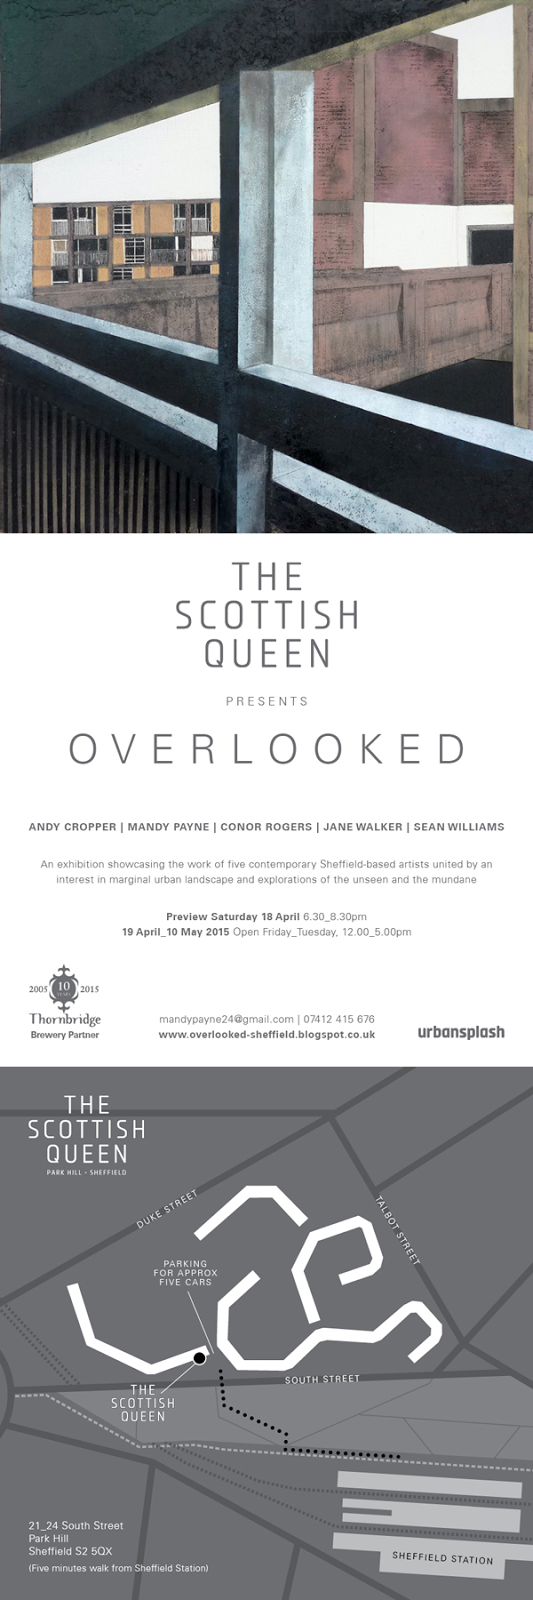 |-- Image and map for invite to 'Overlooked' show. If you can read this sentence you may have images being blocked by your email software --|